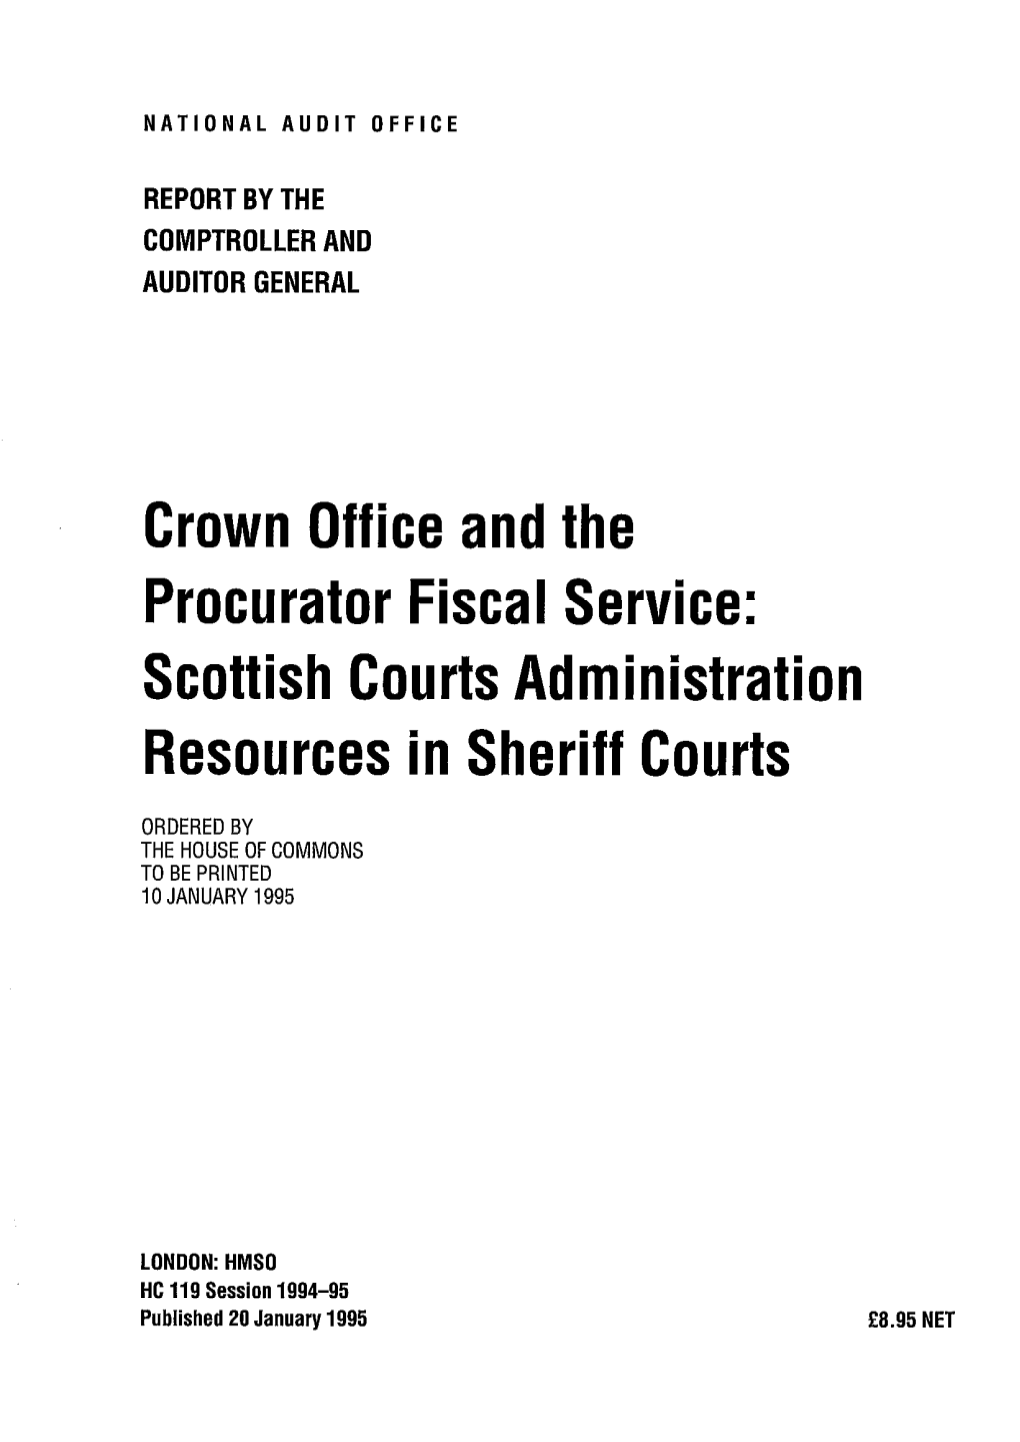 Crown Office and the Procurator Fiscal Service: Scott,Sh Courts Administration Resources in Sheriff Courts